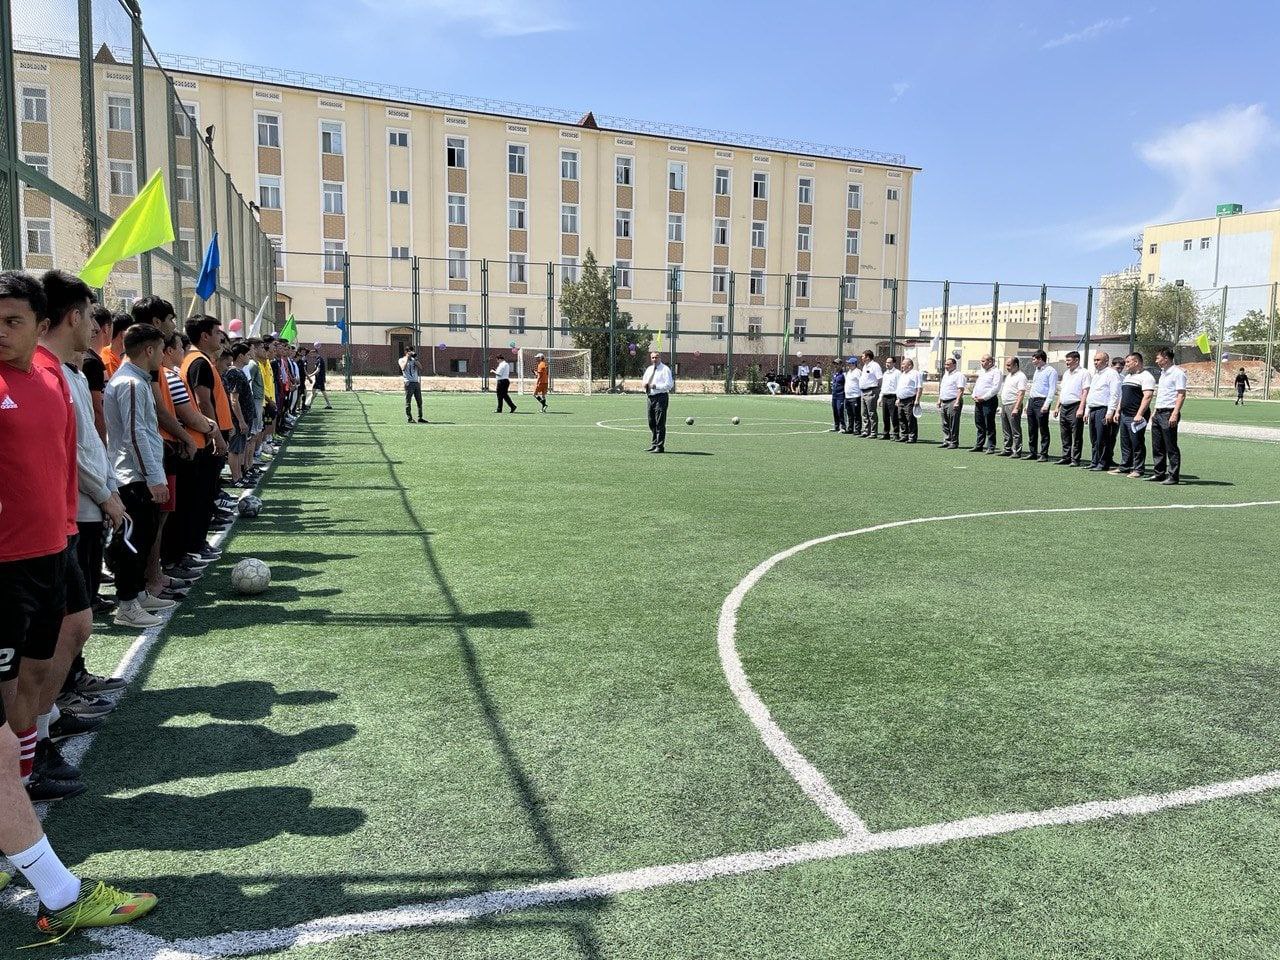 The university round of the mini-football tournament has started